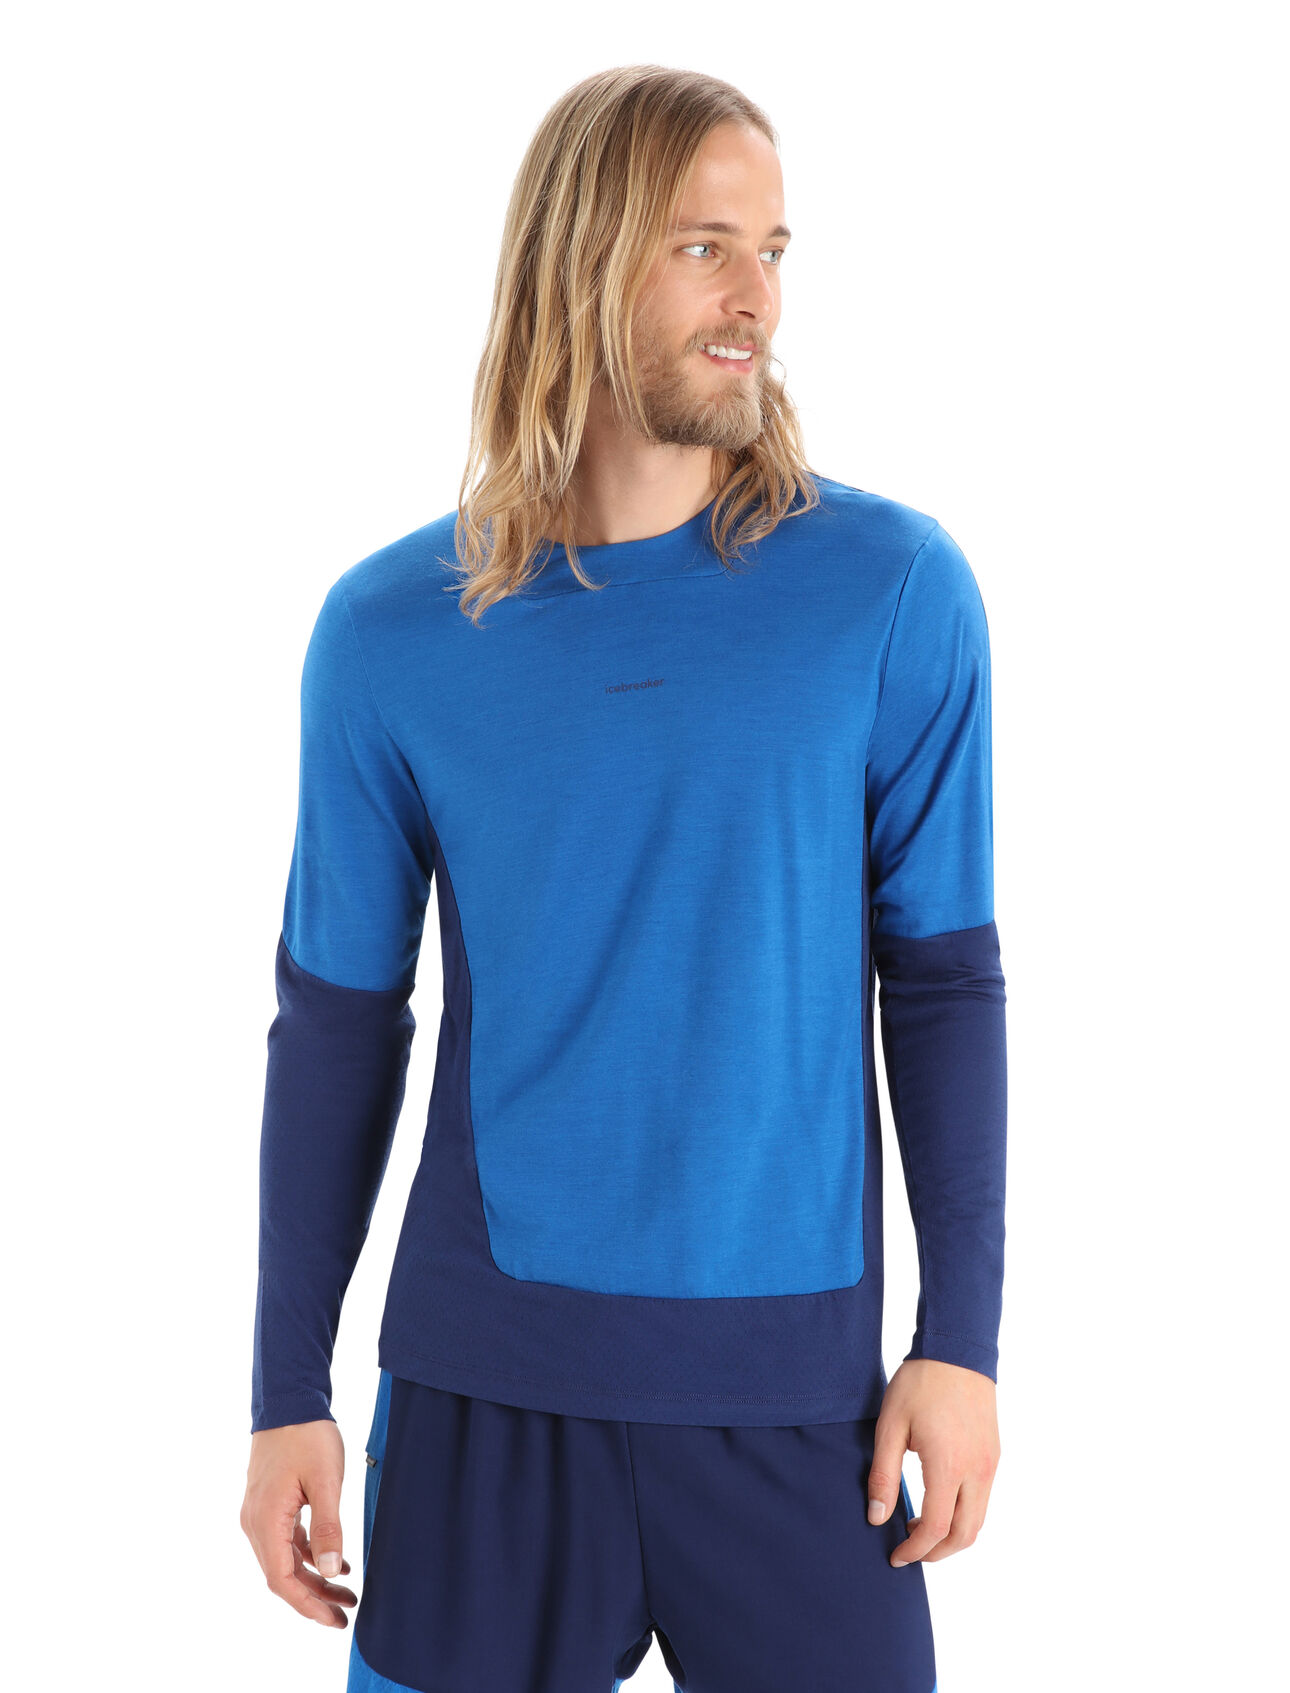 Mens ZoneKnit™ Merino Long Sleeve T-Shirt Our most breathable and lightweight tee designed for running, biking and other high exertion pursuits, the ZoneKnit™ Long Sleeve Tee combines our Cool-Lite™ jersey fabric with strategic panels of eyelet mesh for enhanced airflow.